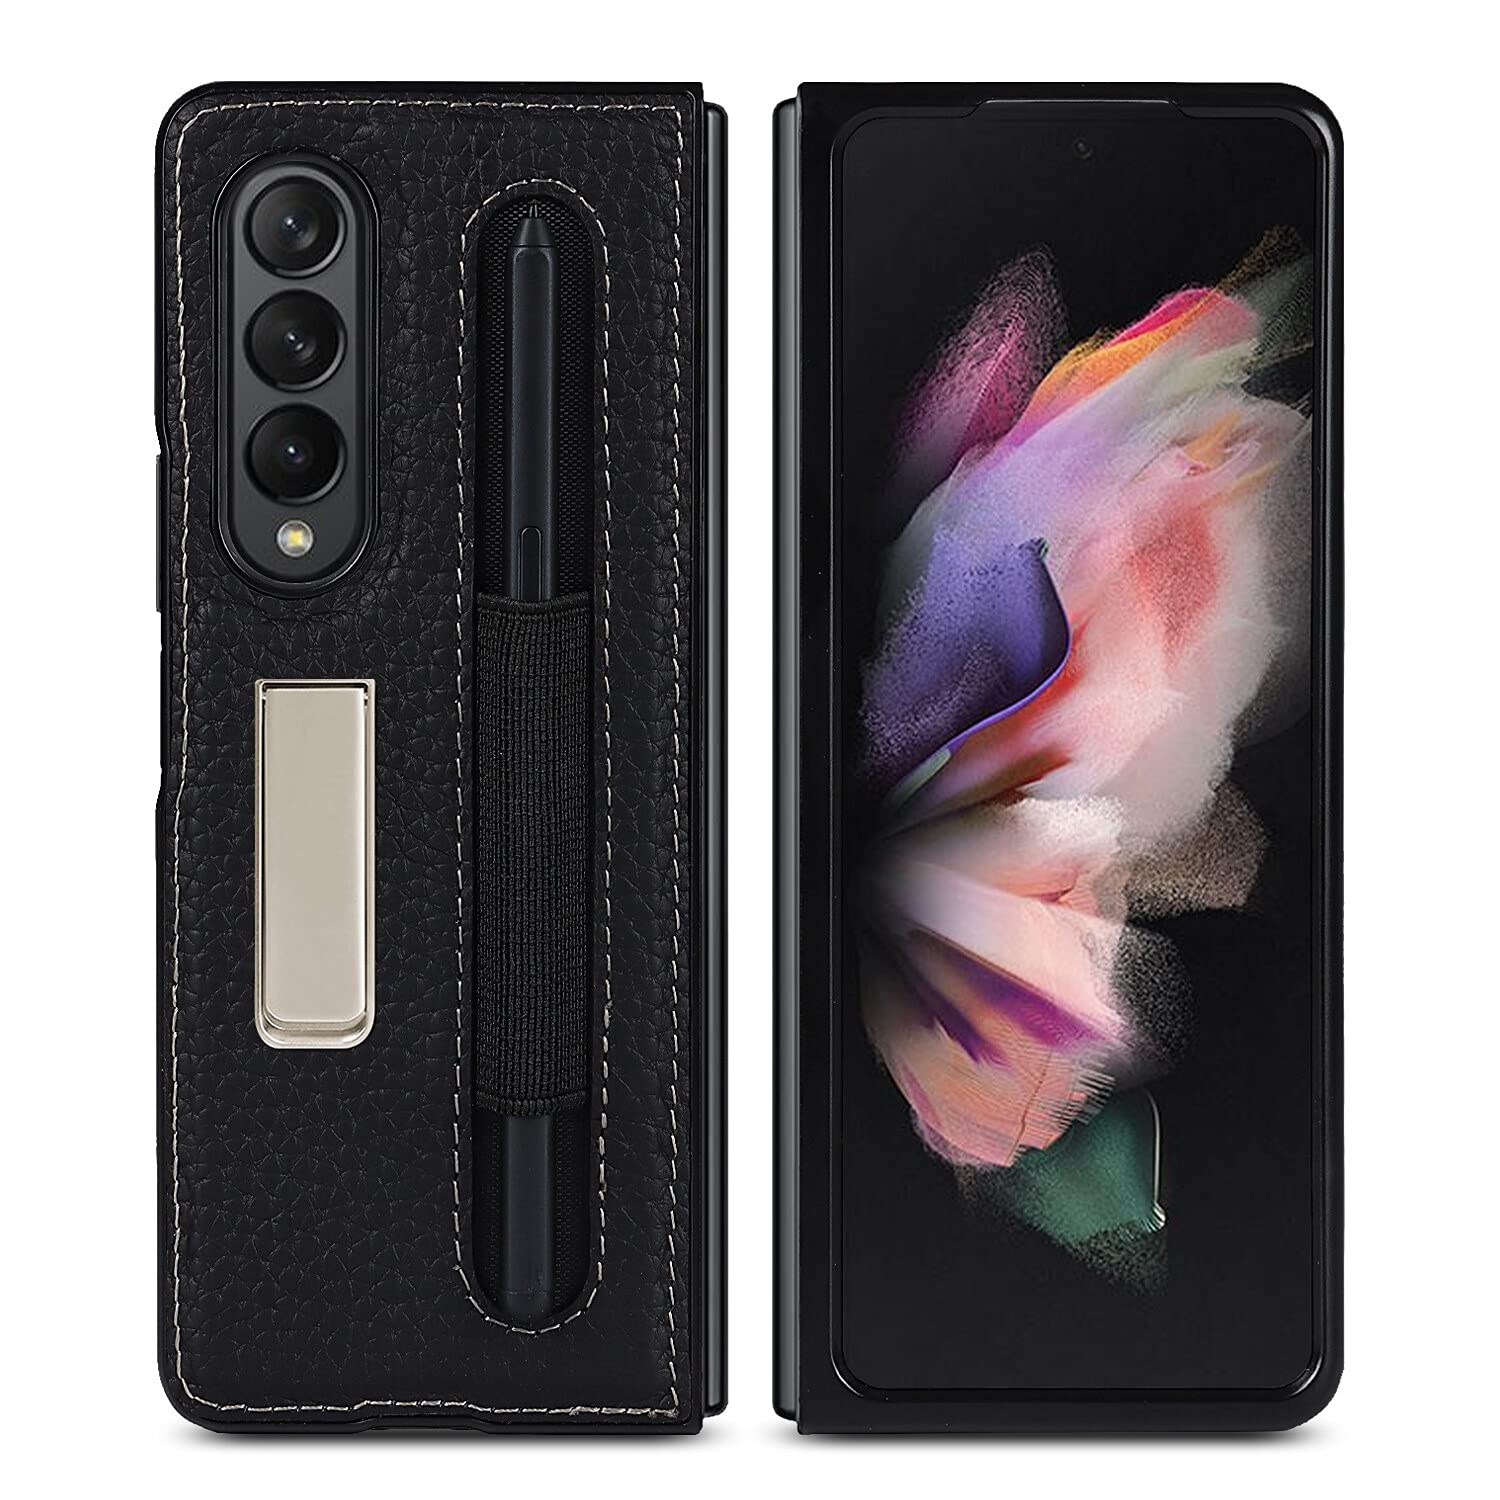 NUOUN Case for Samsung Galaxy Z Fold 3 5G (2021) with Stand, Magnetic Kickstand  Genuine Leather Protective Case - (Black)